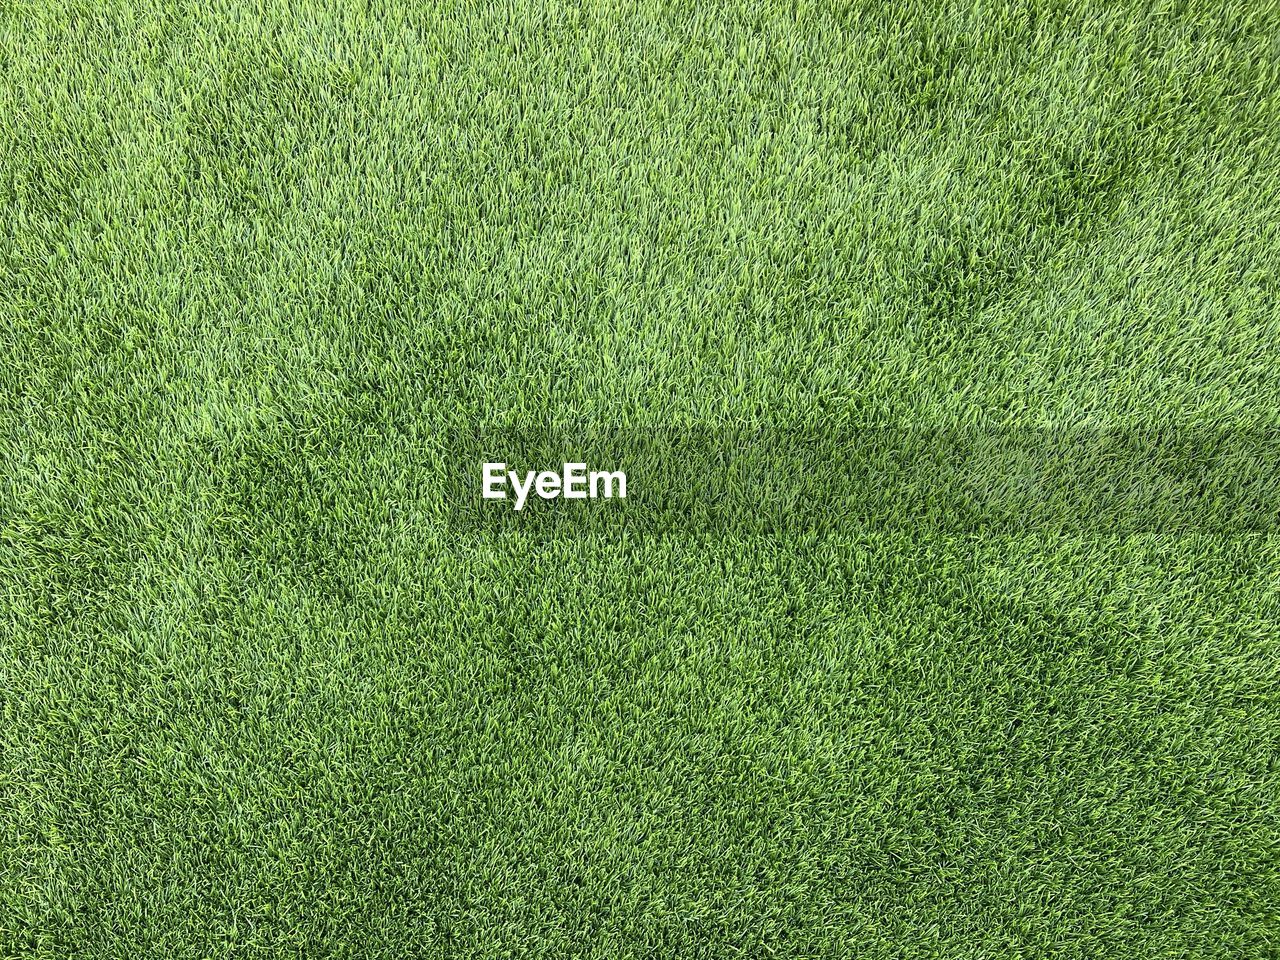 green, grass, plant, backgrounds, lawn, full frame, flooring, artificial turf, sports, textured, grassland, no people, turf, playing field, soccer field, nature, soccer, pattern, american football field, field, leaf, soil, team sport, high angle view, land, close-up, shrub, golf course, day, carpet, outdoors, golf, grass area